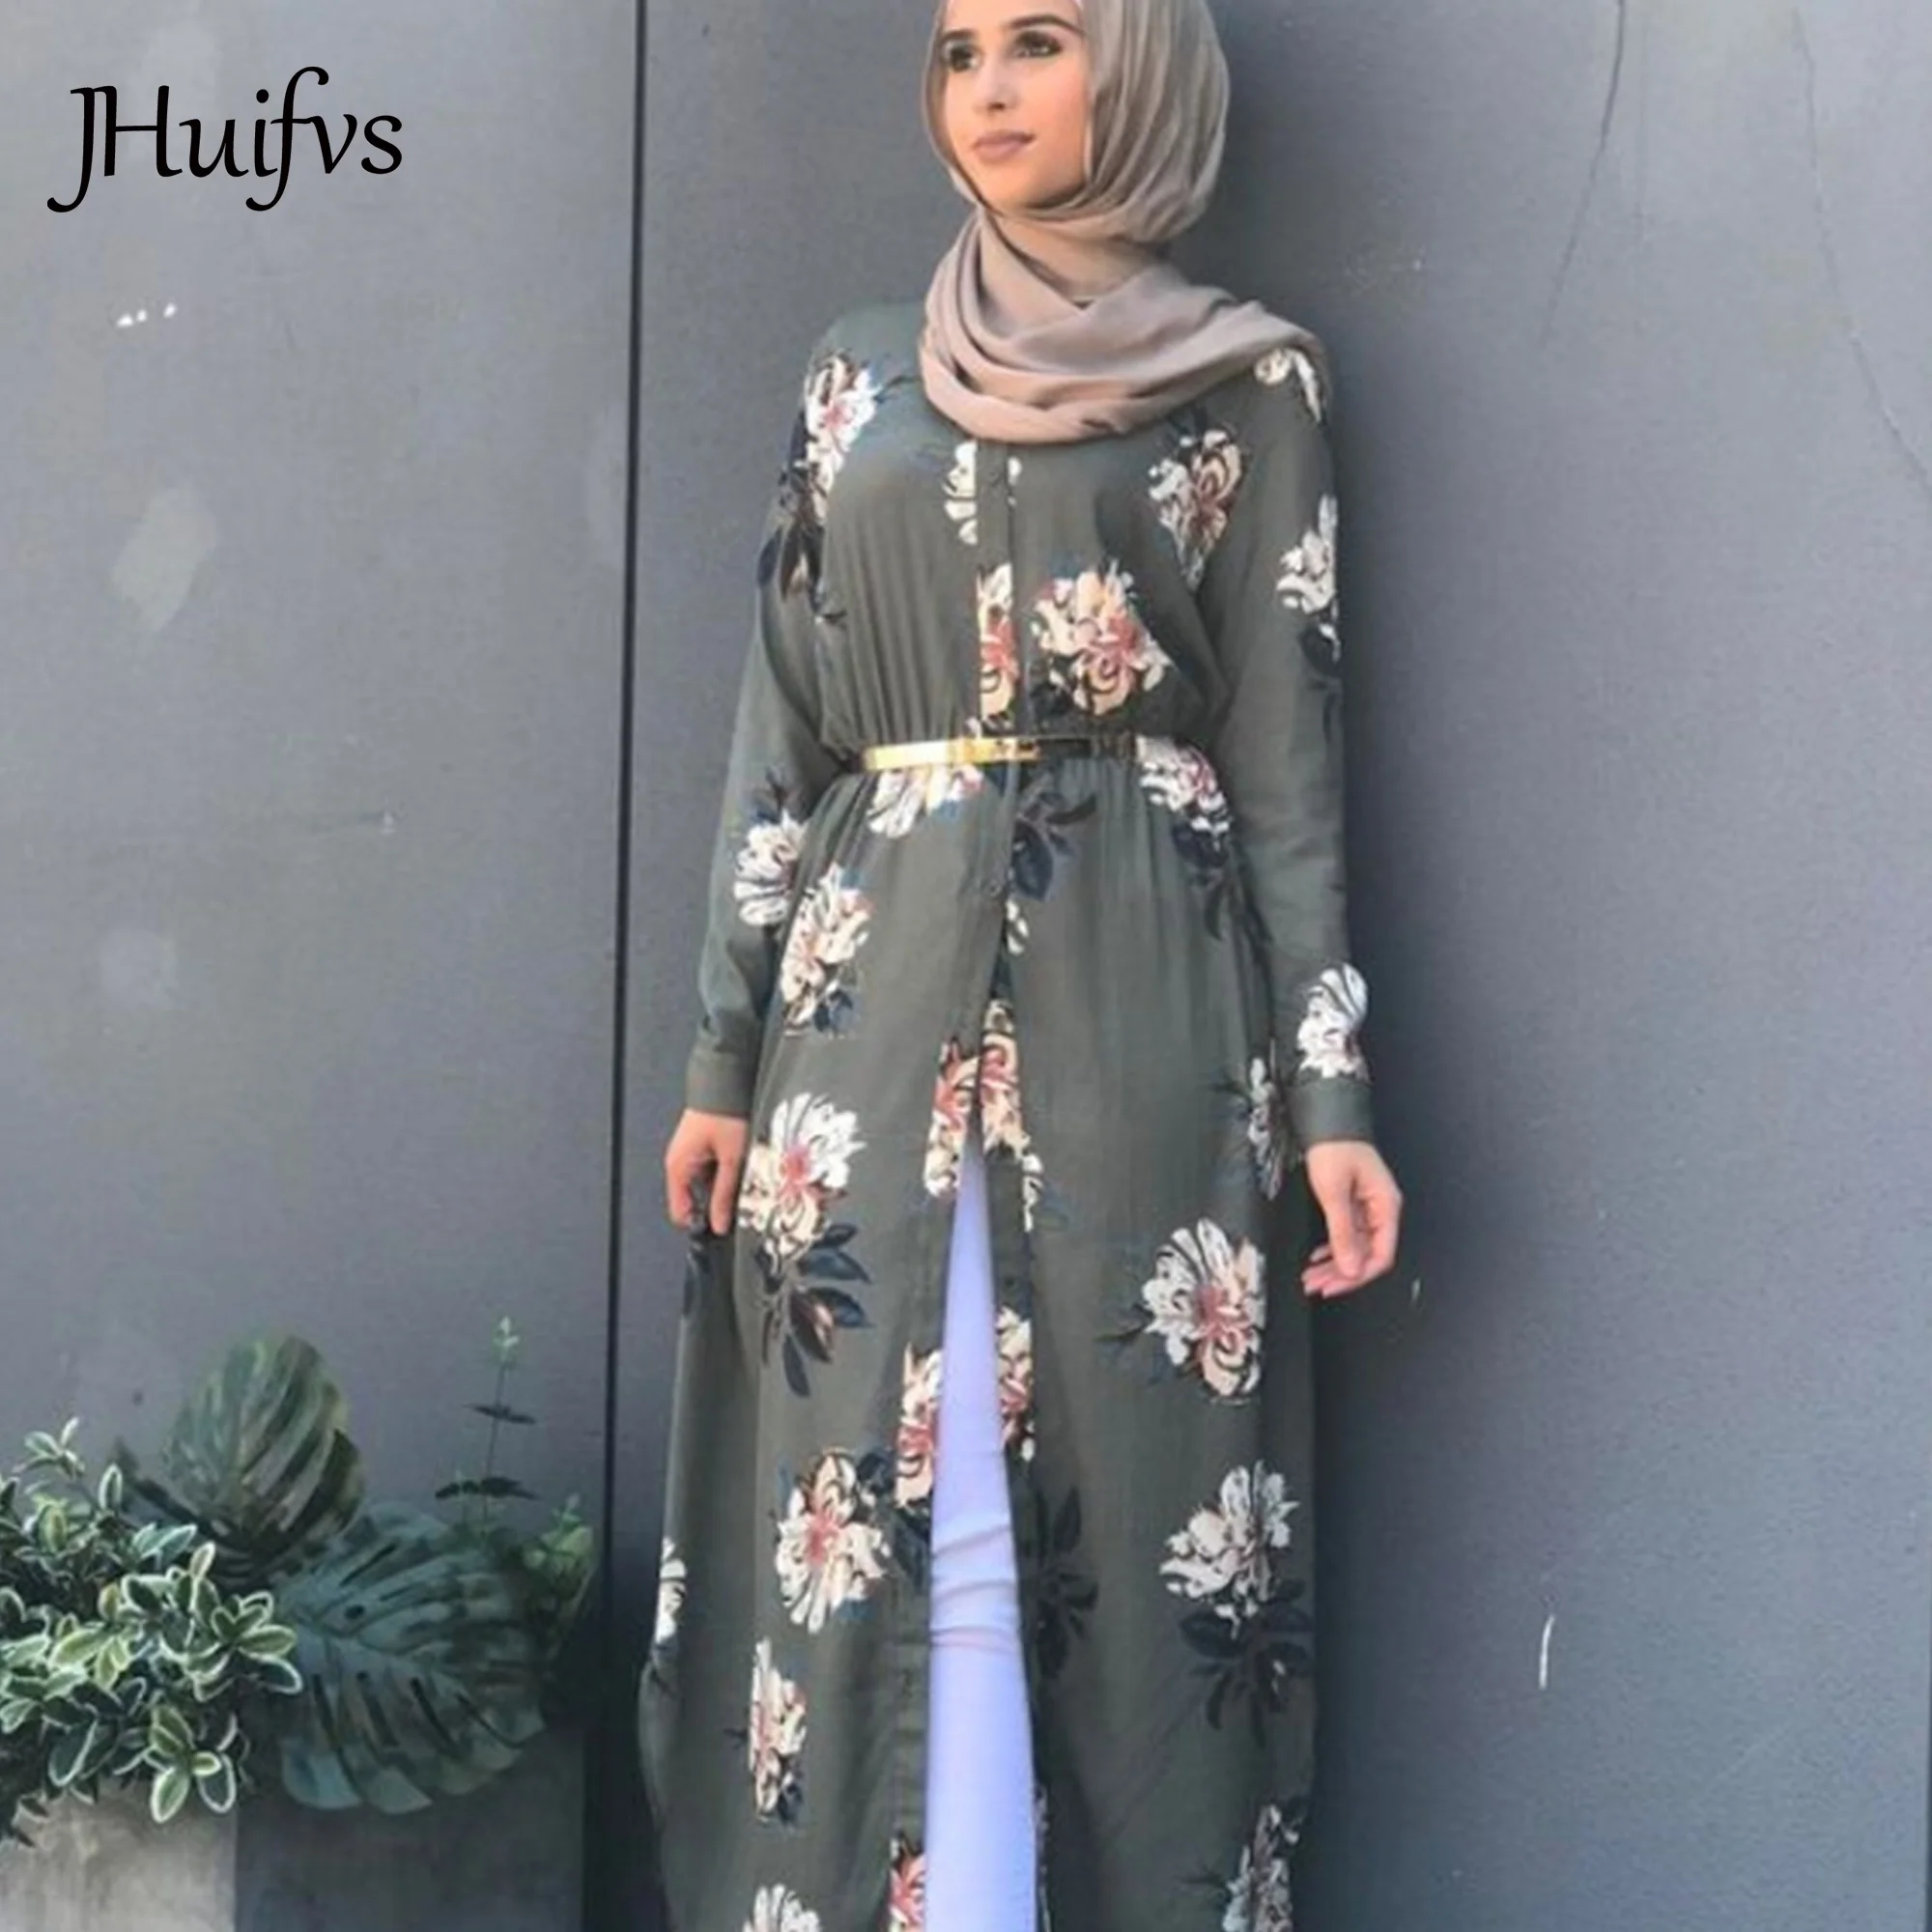 

2020 New Trendy Girls Floral Printed Long Sleeve Open Cardigans Modest Muslimah Dress, 4 colors